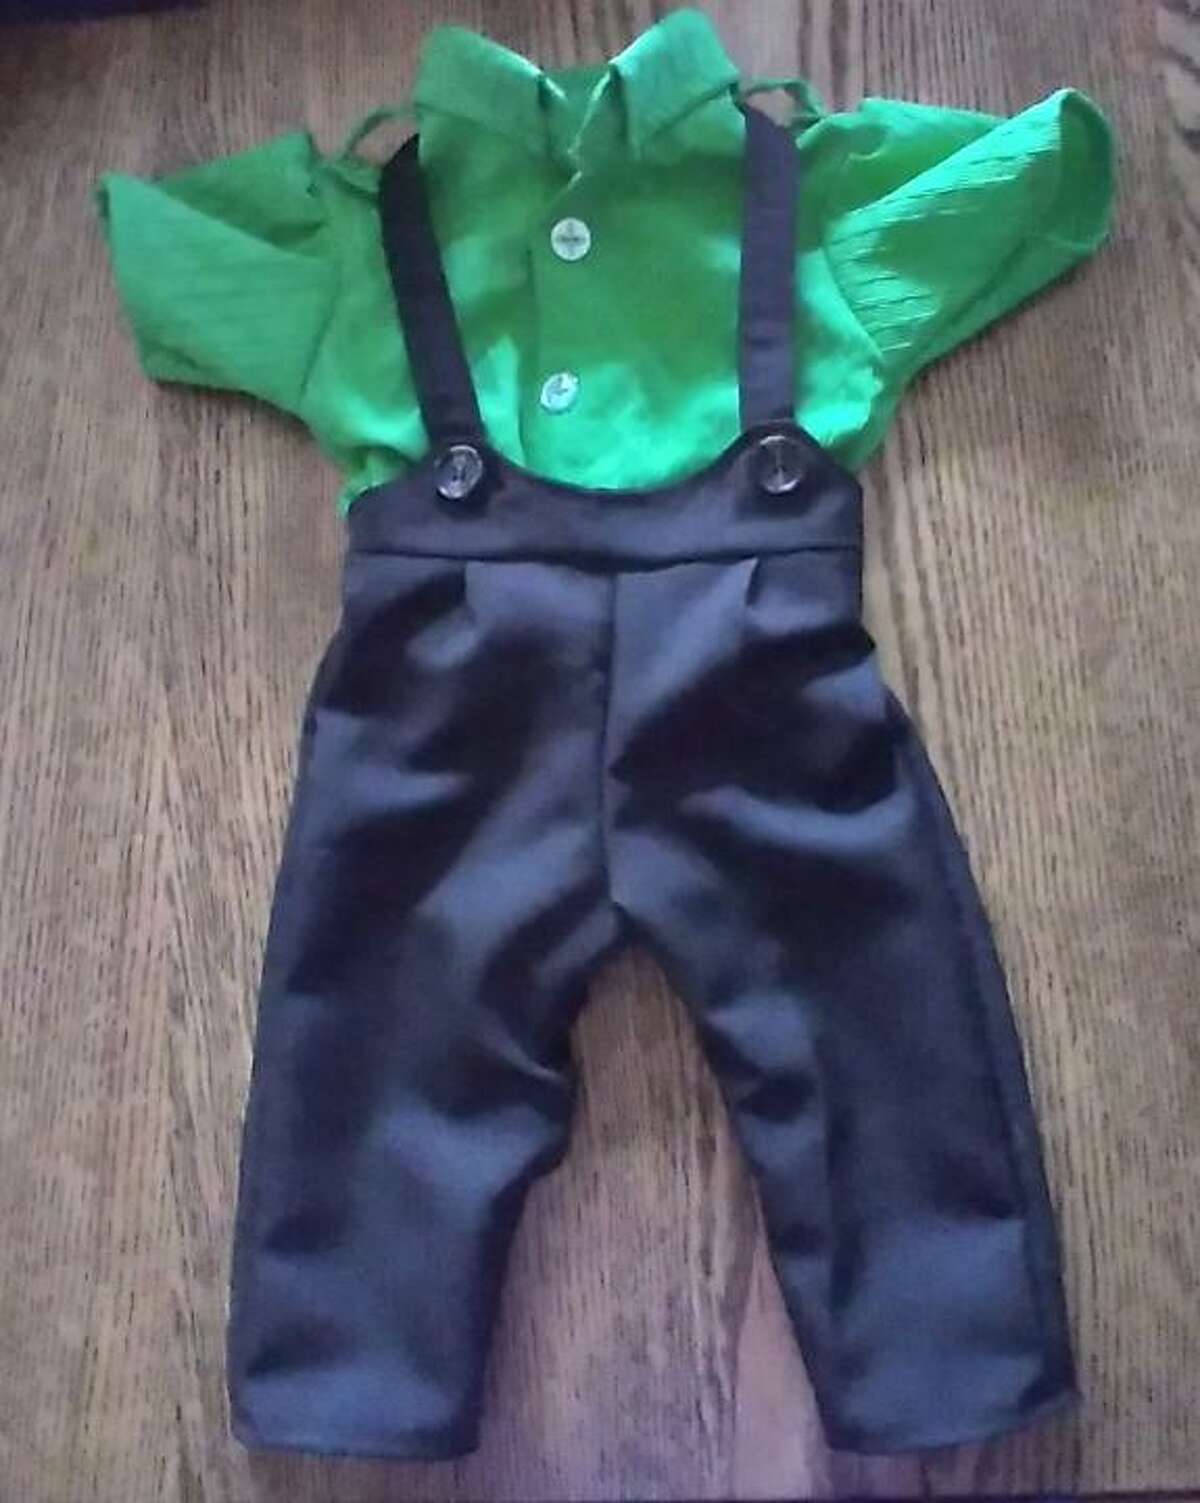 This was to be baby Denzel’s outfit for the wedding of nephew Benjamin and Crystal, but he didn’t get to attend.